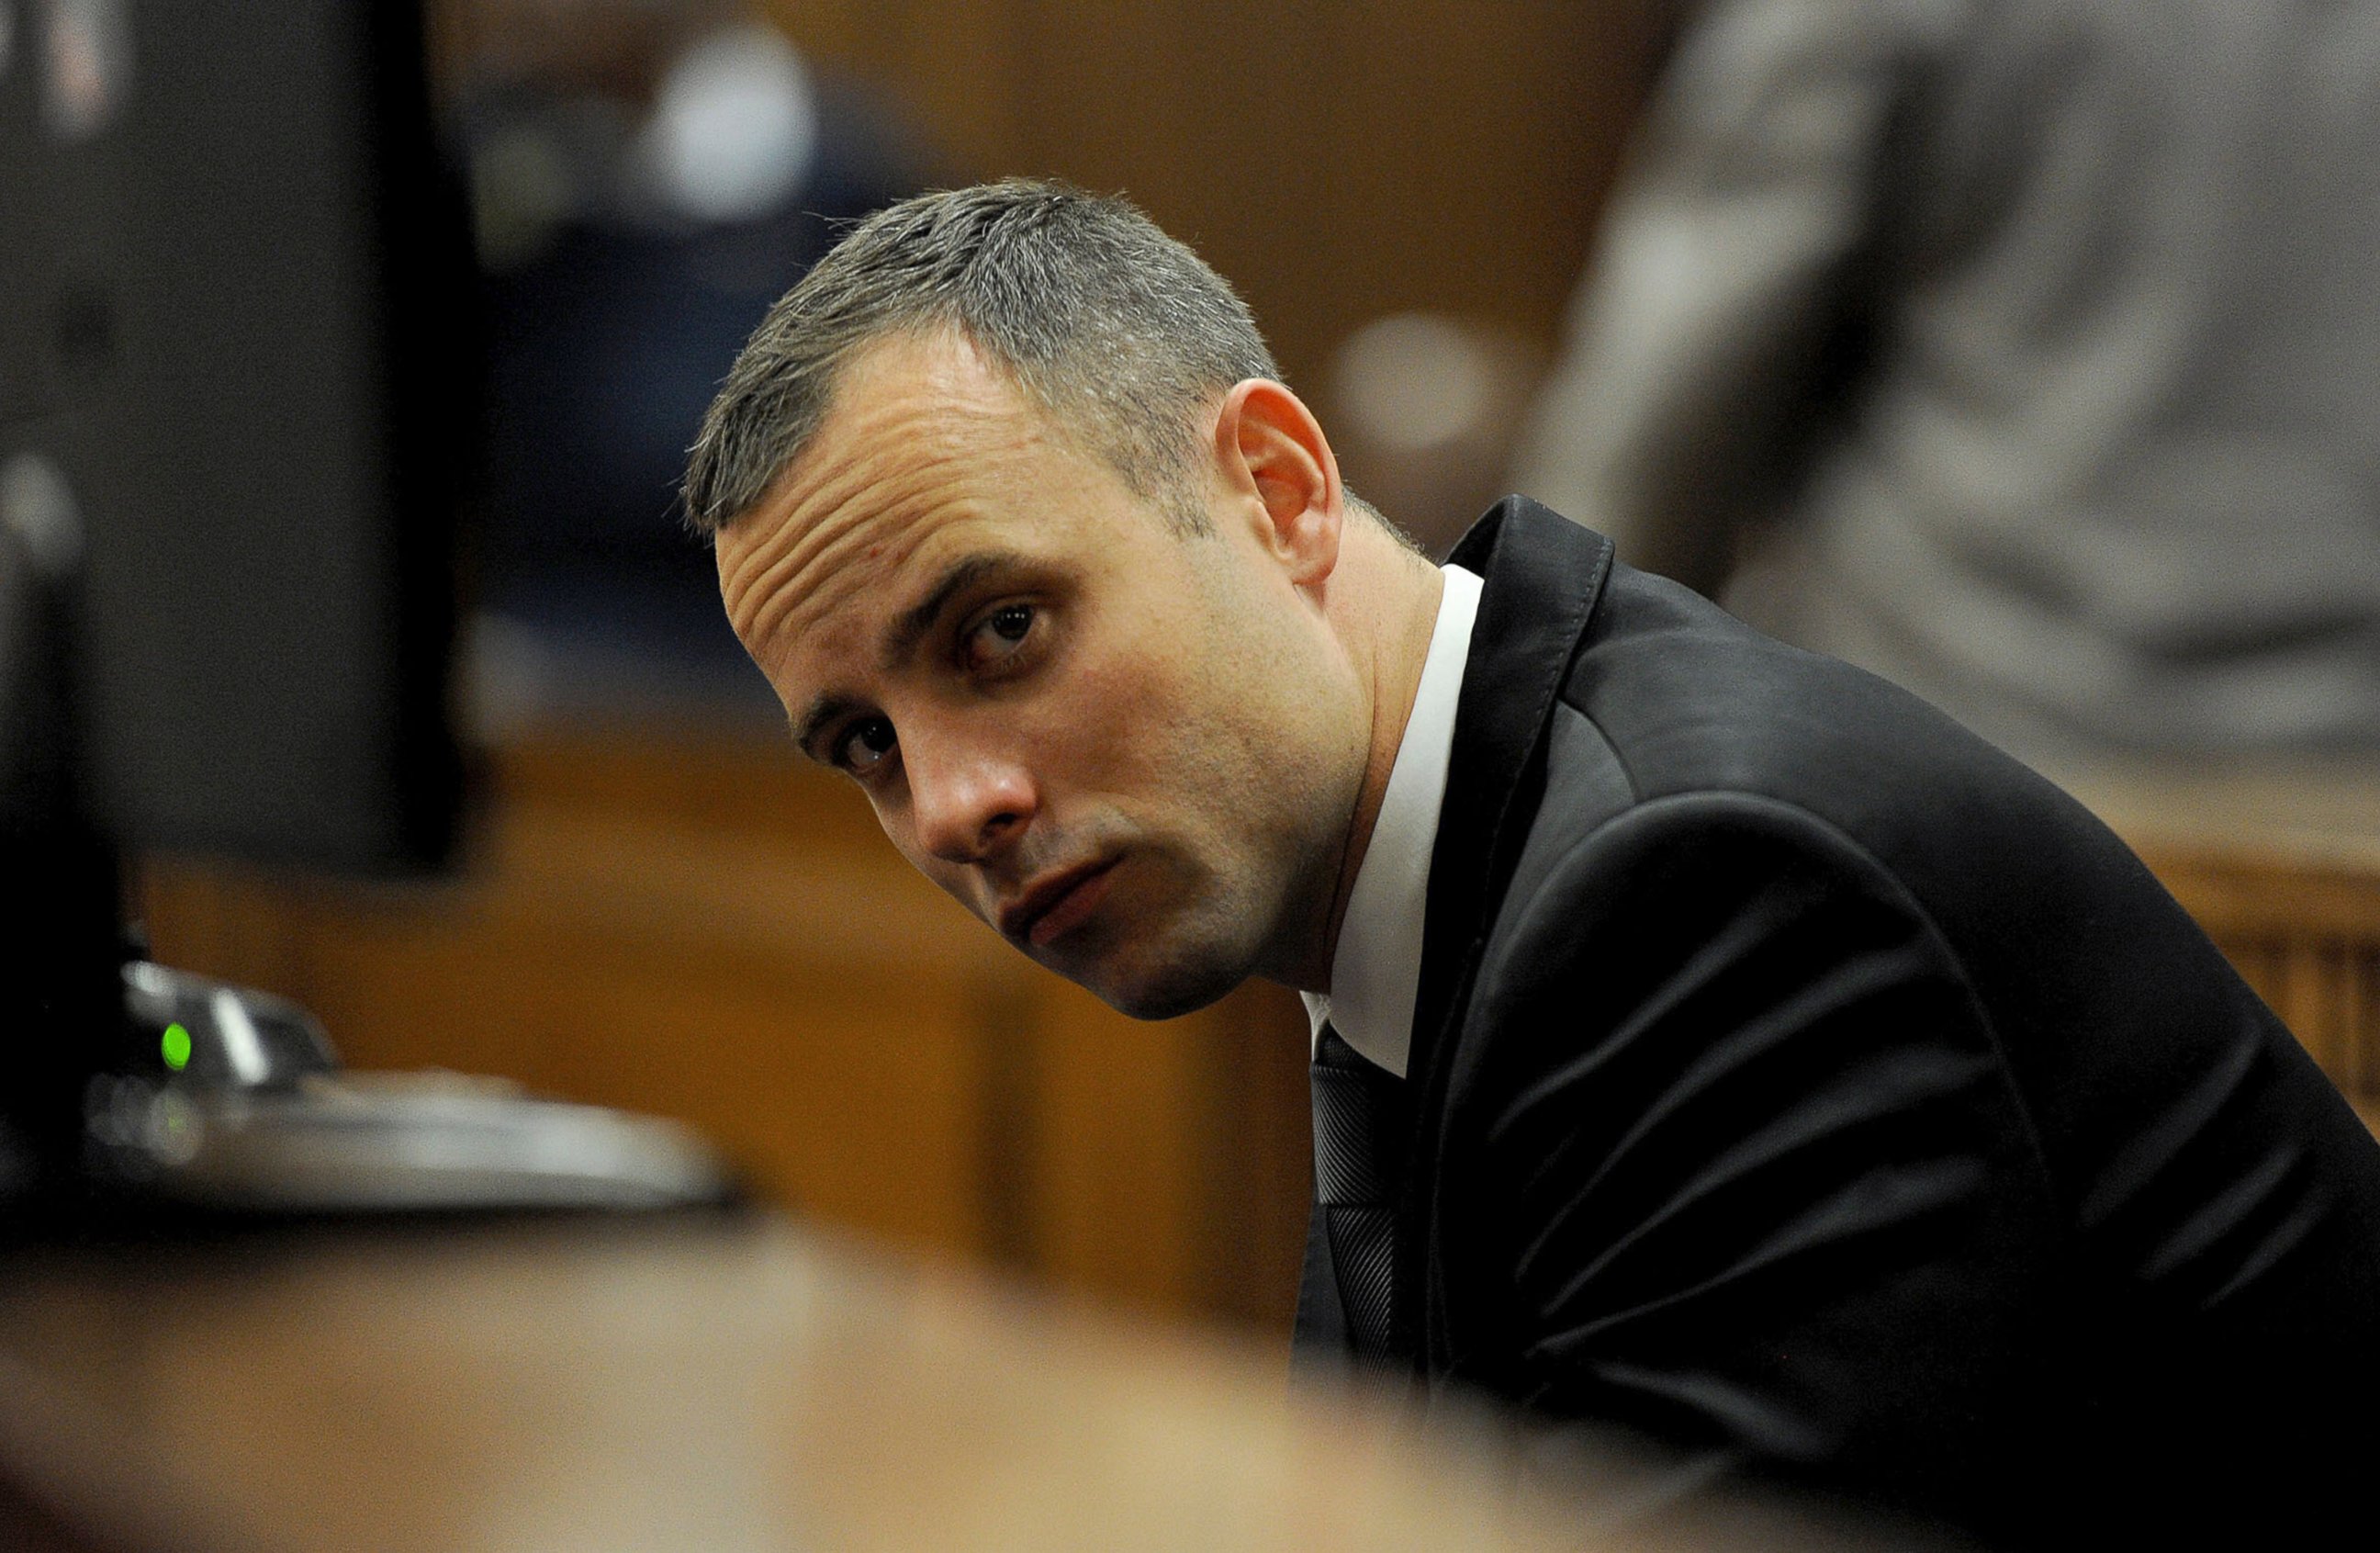 PHOTO: Oscar Pistorius sits in court for his ongoing murder trial in Pretoria, South Africa, May 12, 2014.